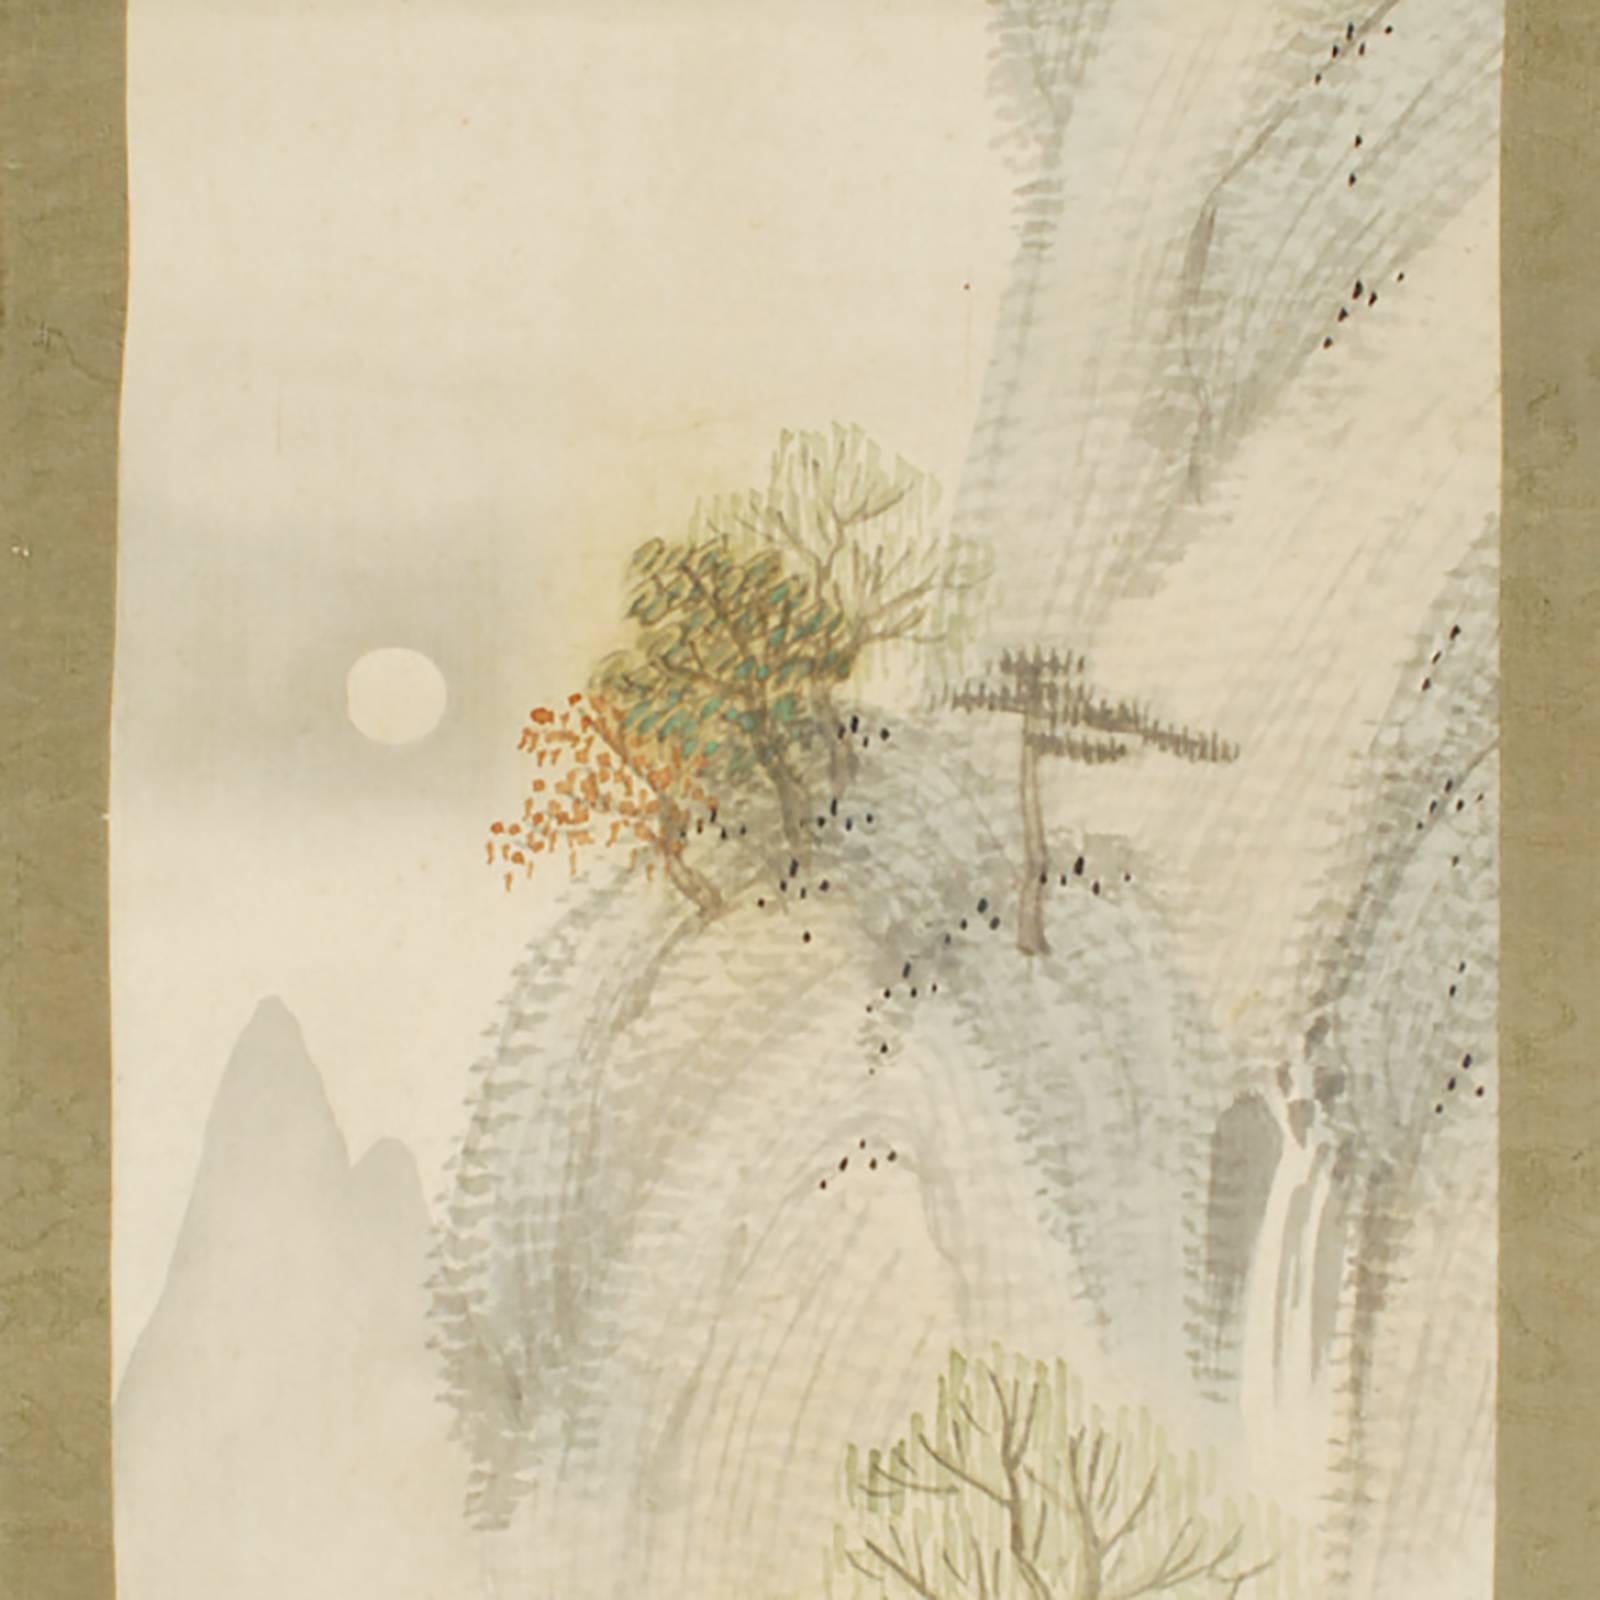 Although Western painting was initially embraced during Japan’s Meiji period (1868-1912), artists brought on a revival of traditional painting styles as they sought to create a modern Japanese style with roots in the past. This gorgeous hanging